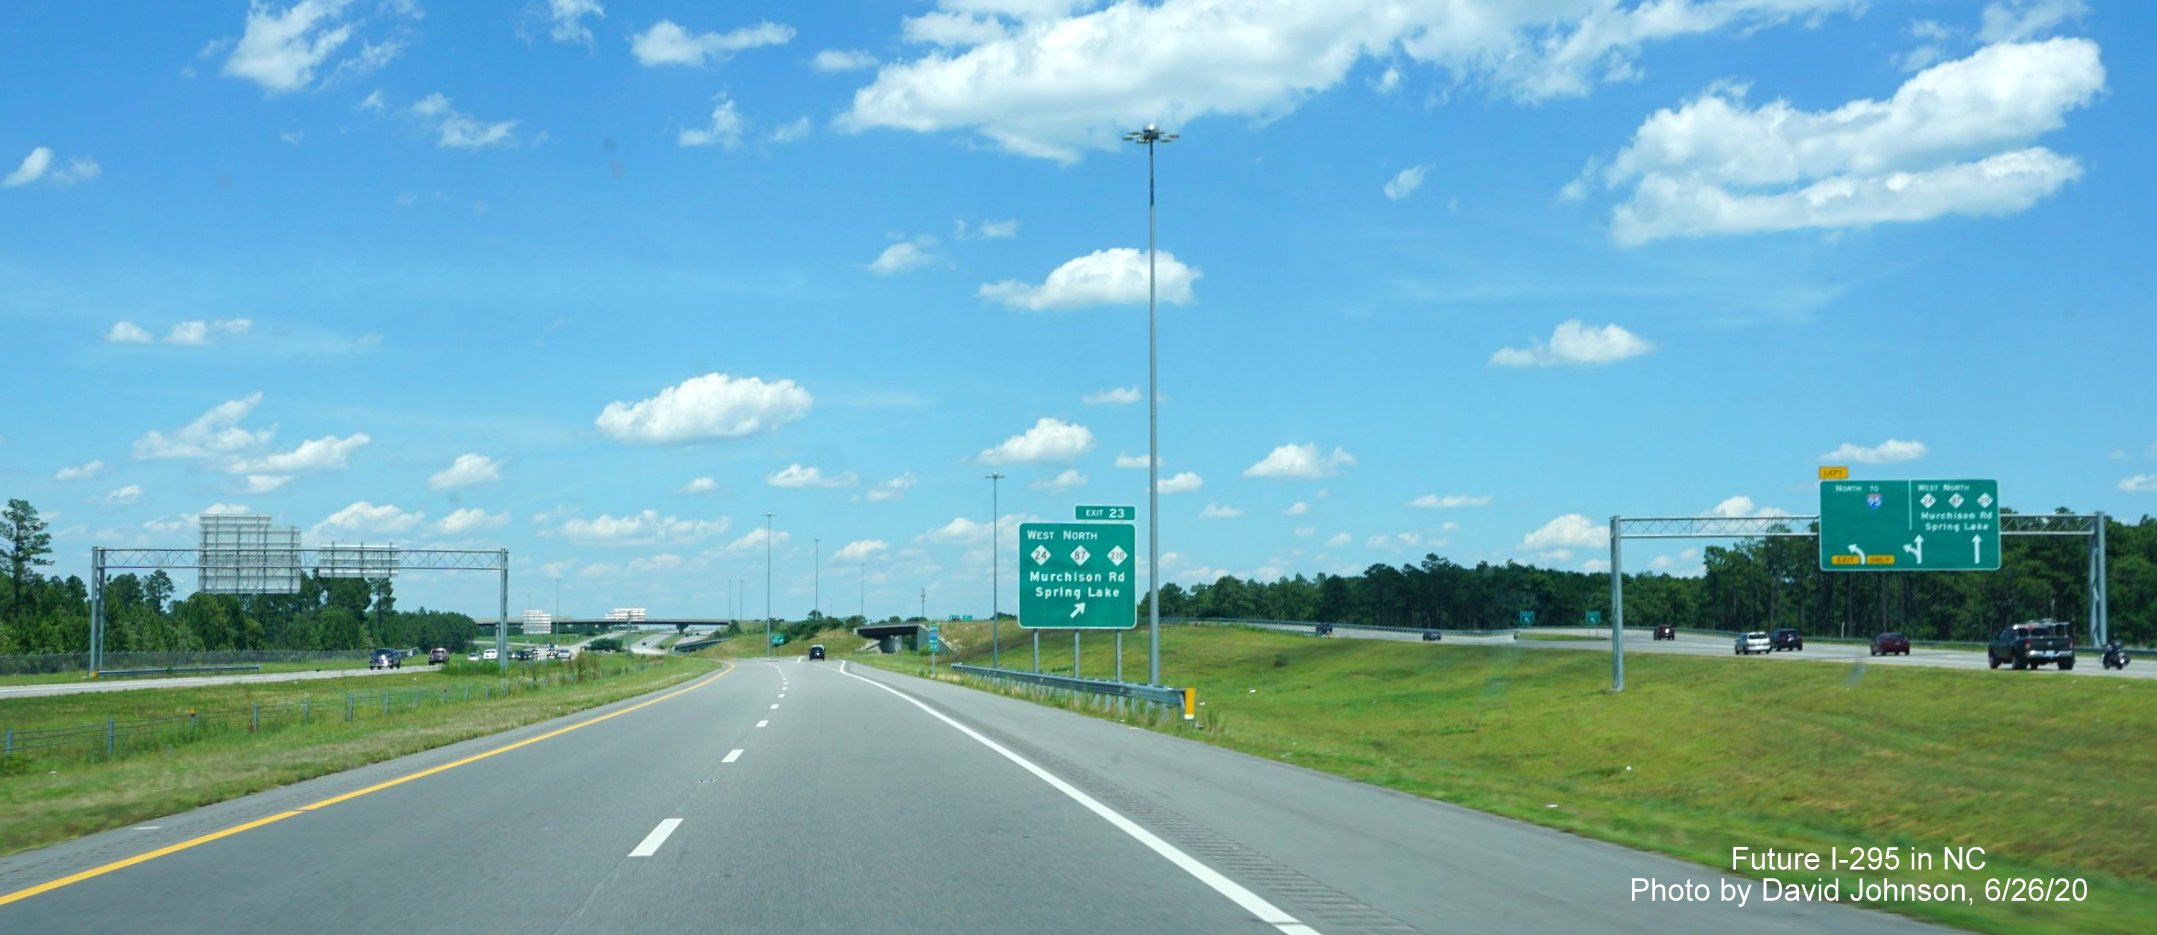 Image of ground mounted signage along I-295 North for the Murchison Road exit and overhead ramp signage
        with a missing 295 shield, by David Johnson June 2020